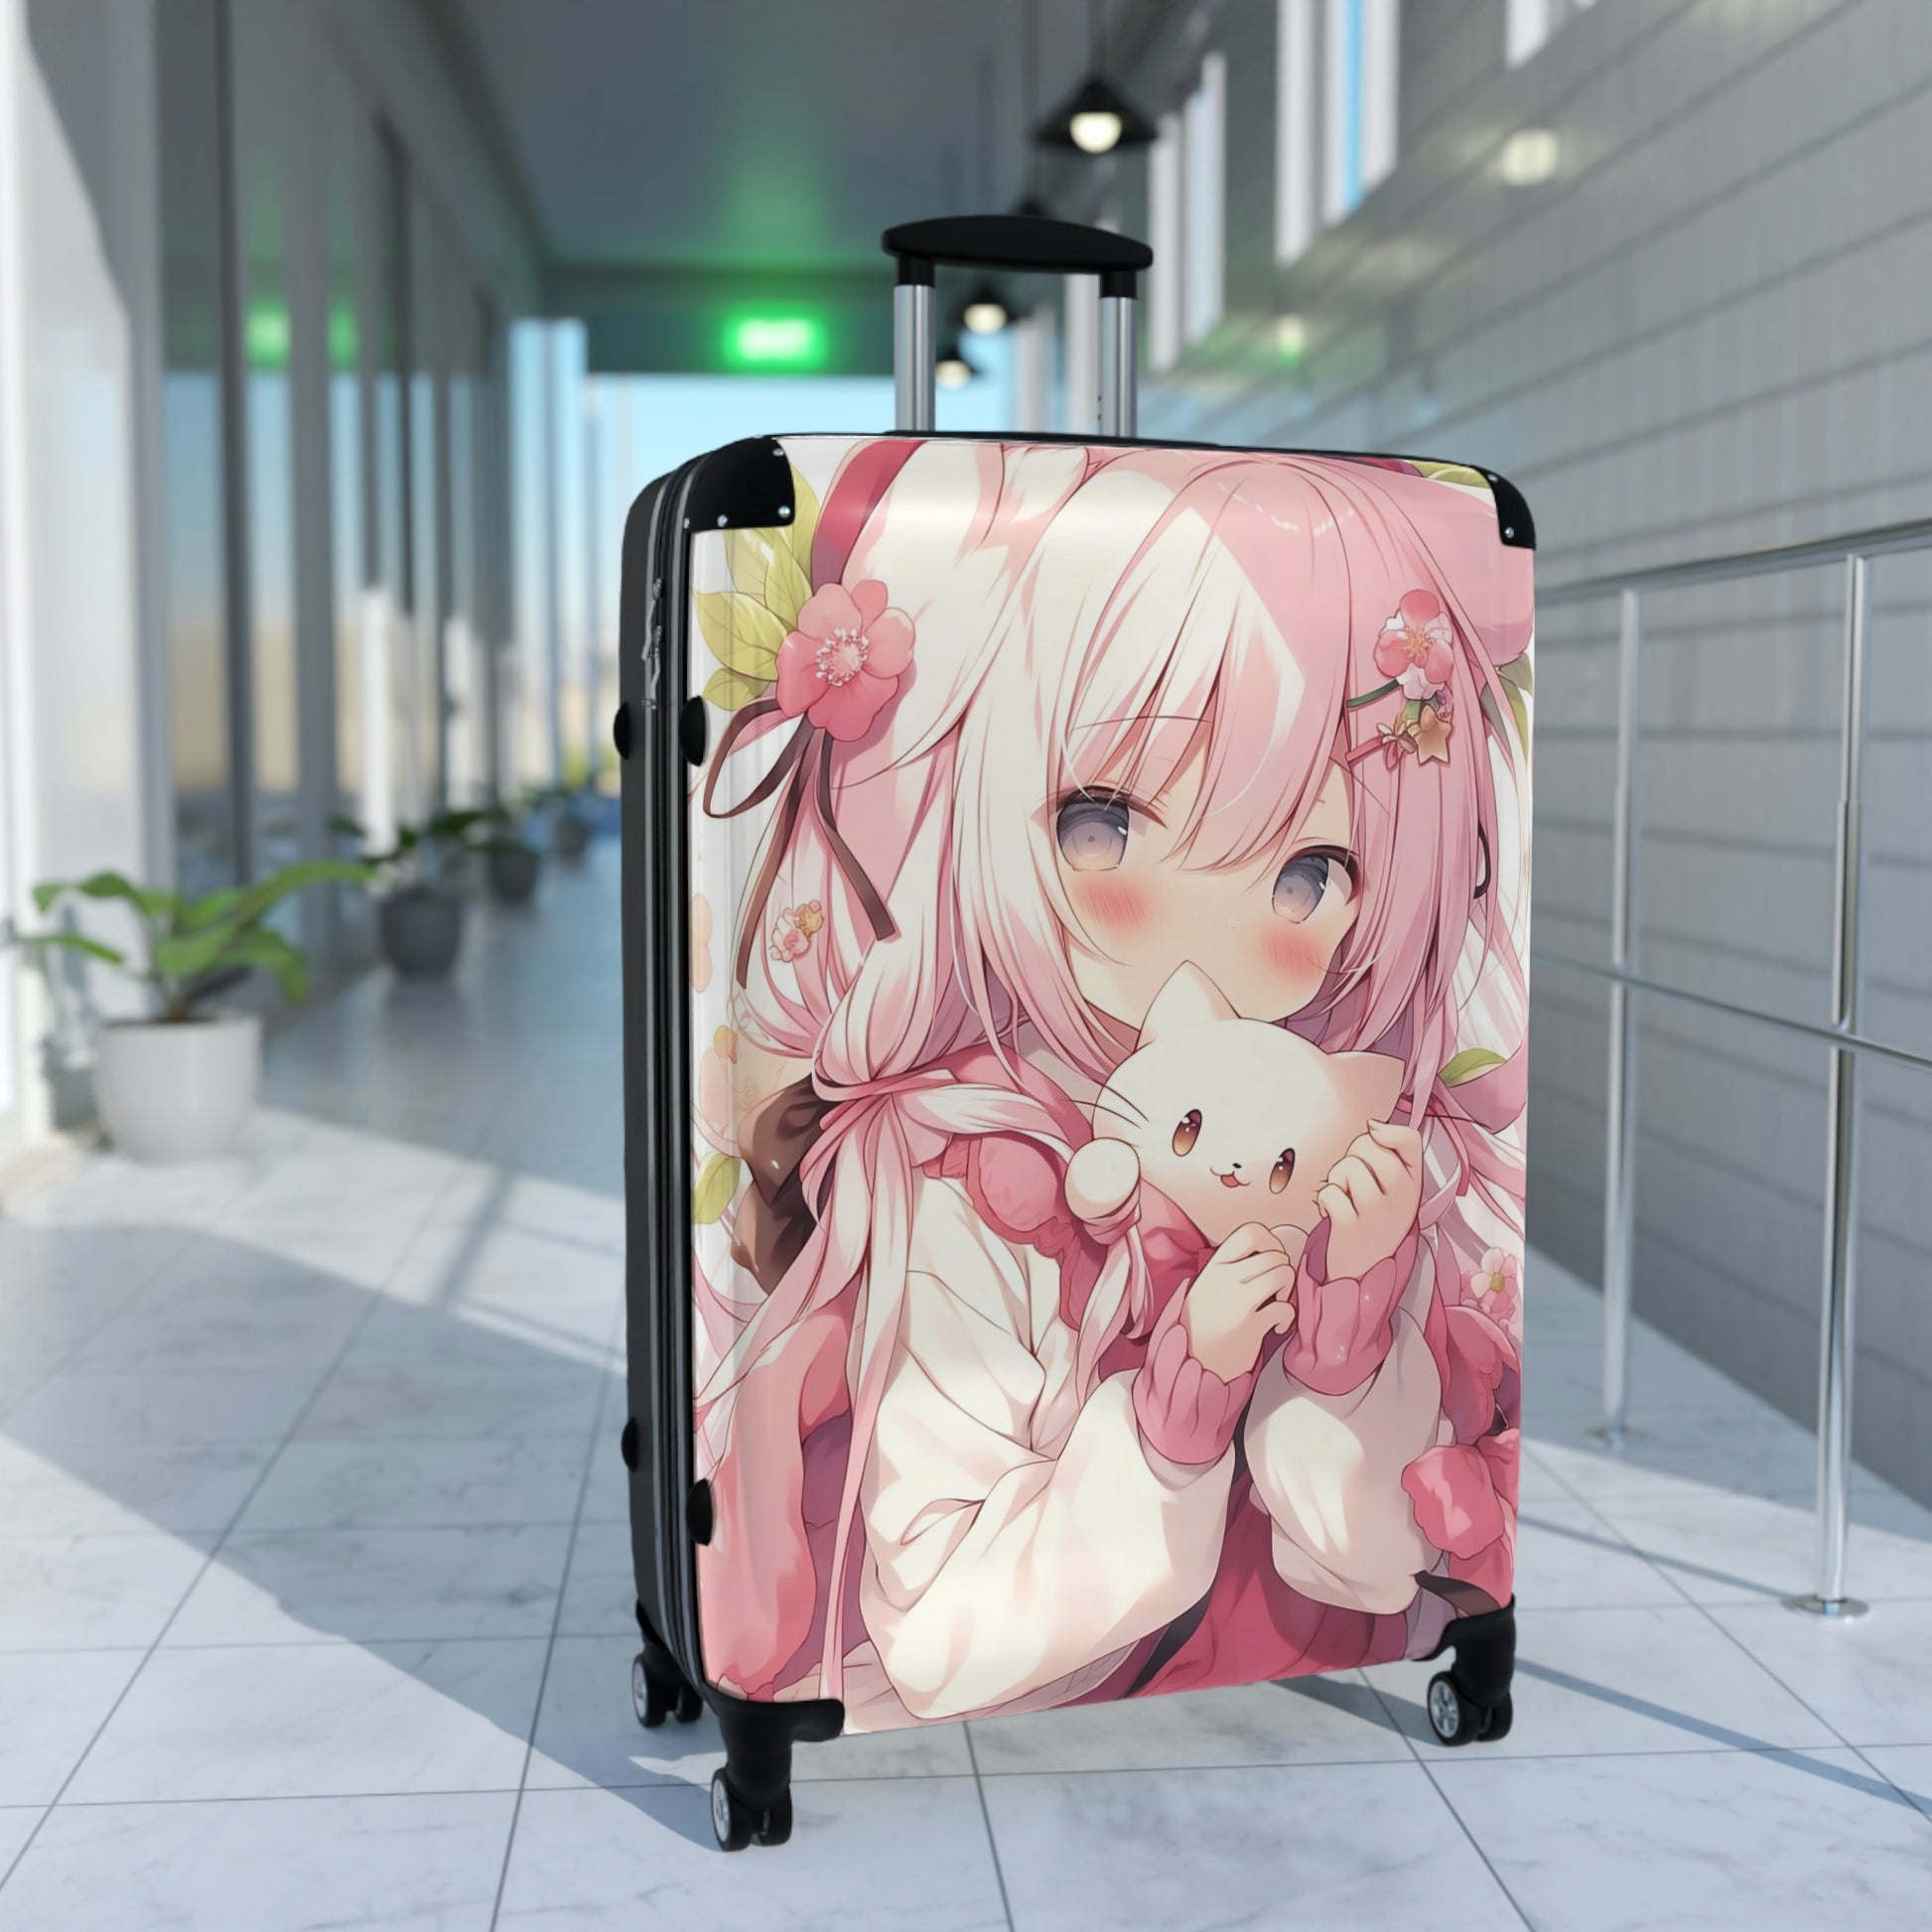 Kawaii Cats Suitcase Chibi Gift for Traveler Travel Accessories Kawaii  Luggage Kawaii Gift Idea Cute Suitcase for Anime Kittens 